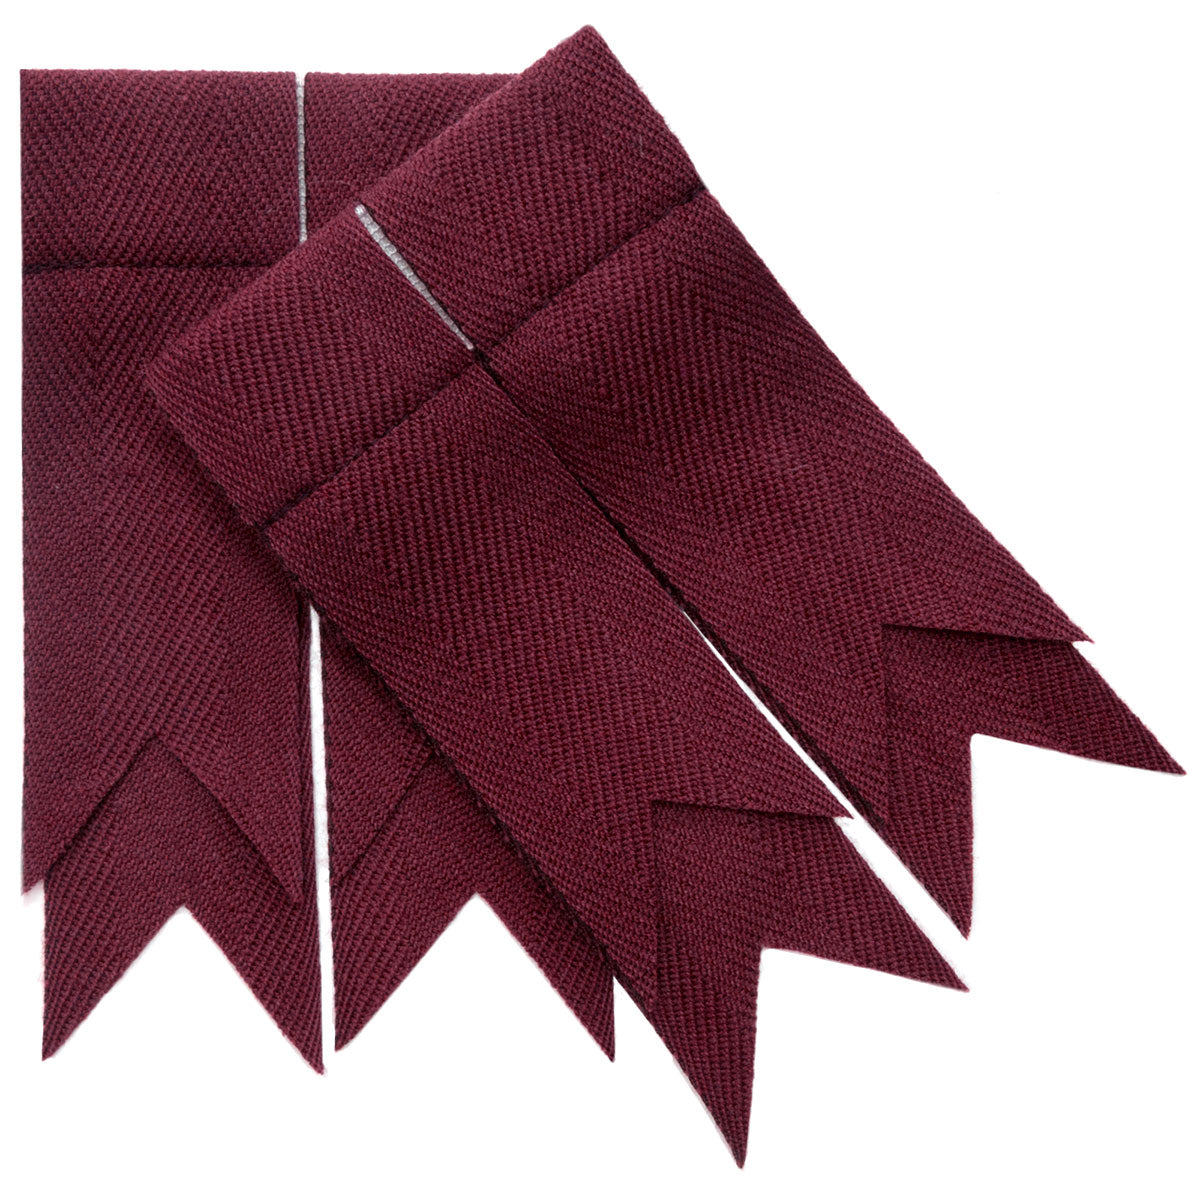 Maroon 100% Pure New Wool Garter Flashes